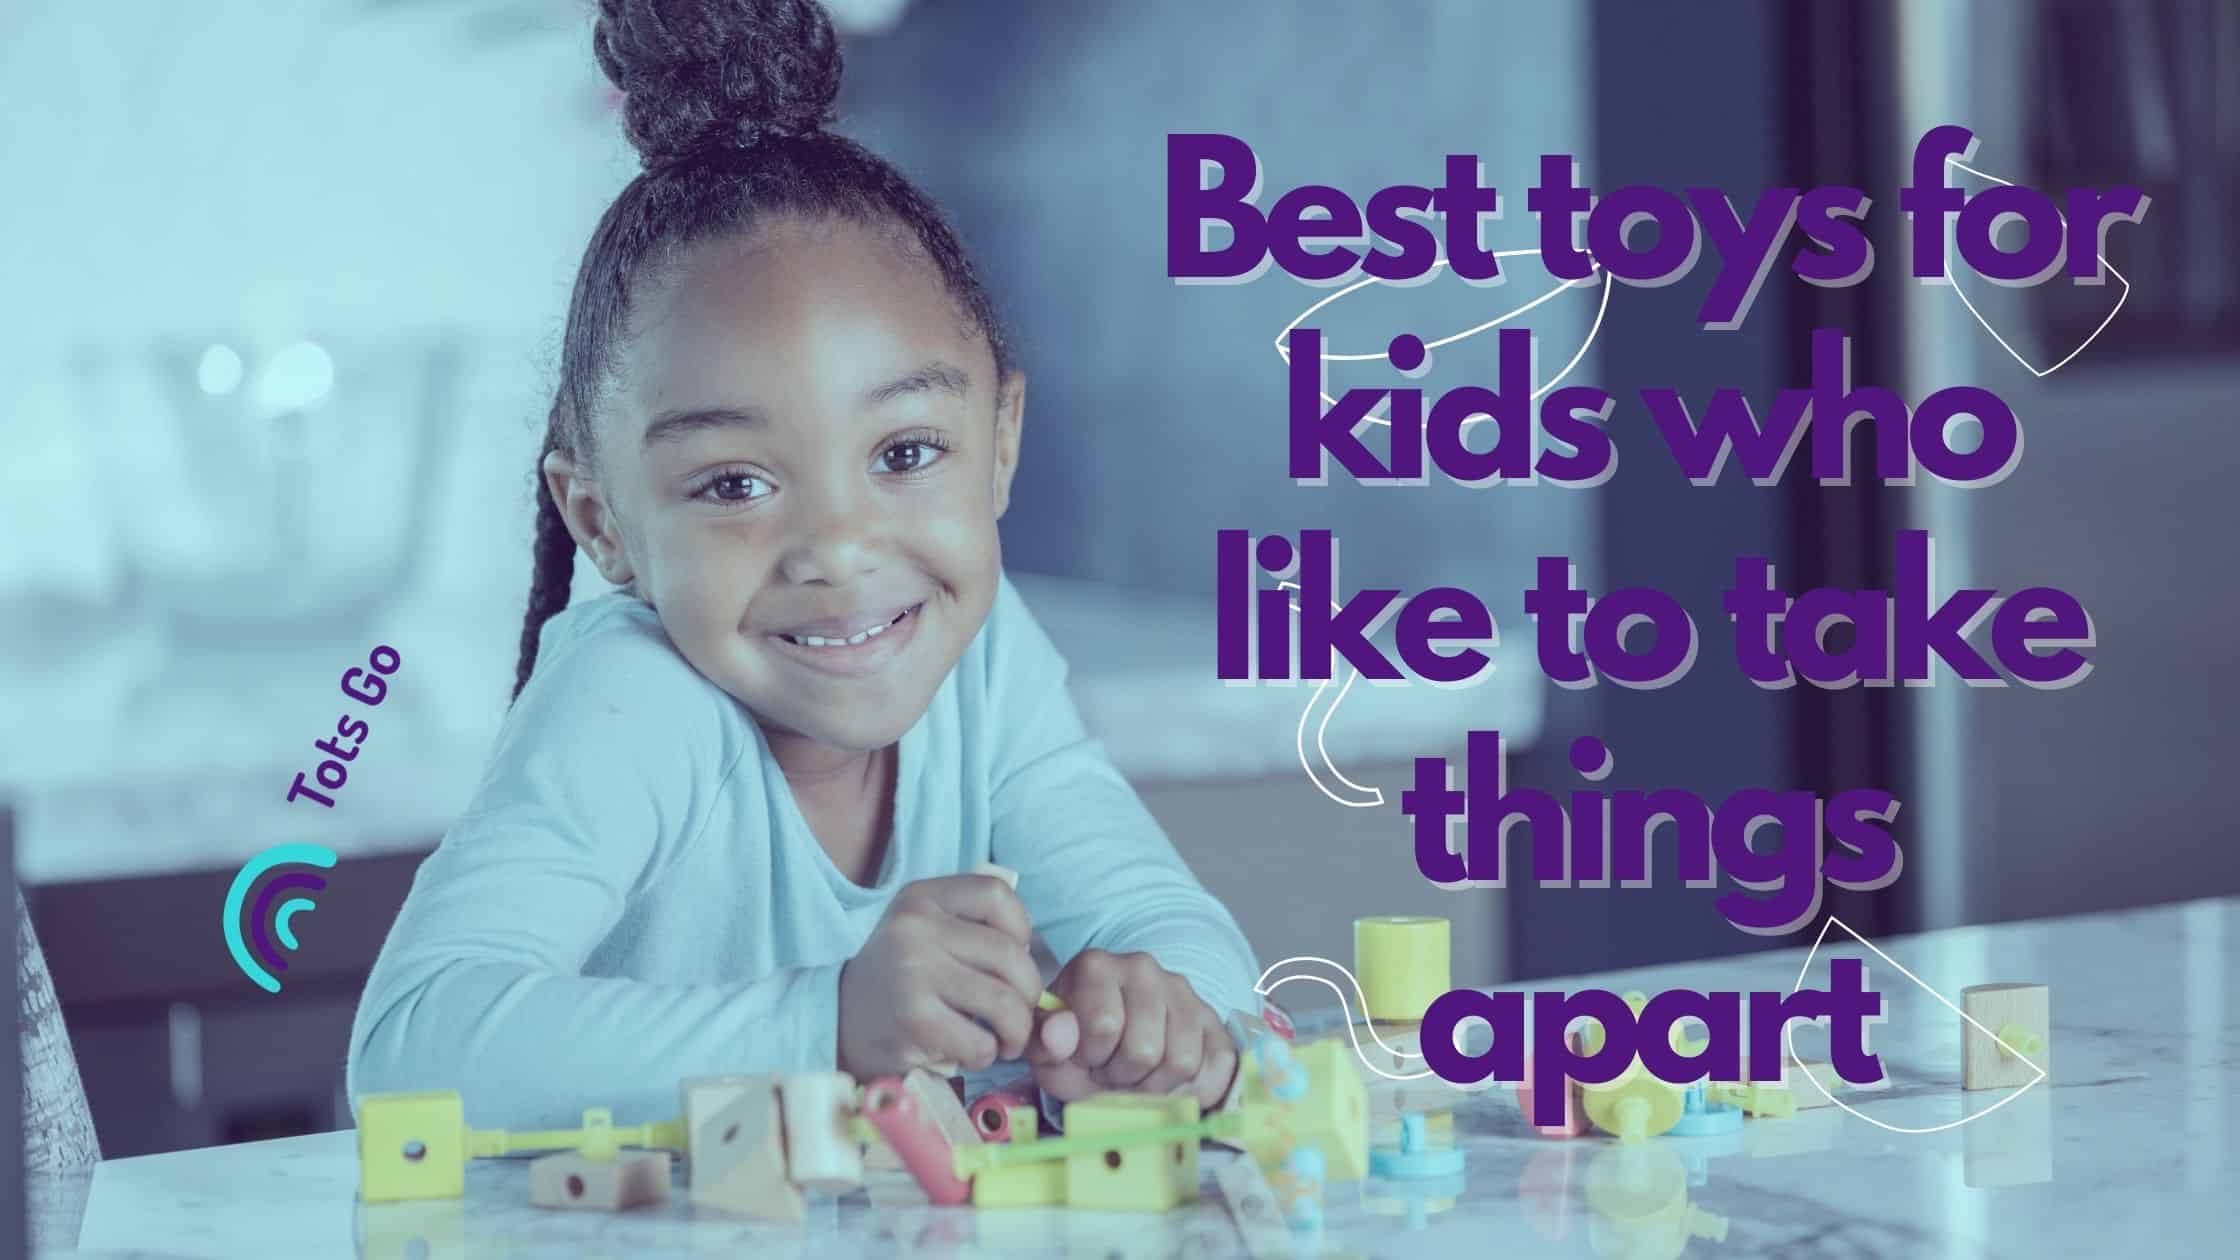 Best toys for kids who like to take things apart